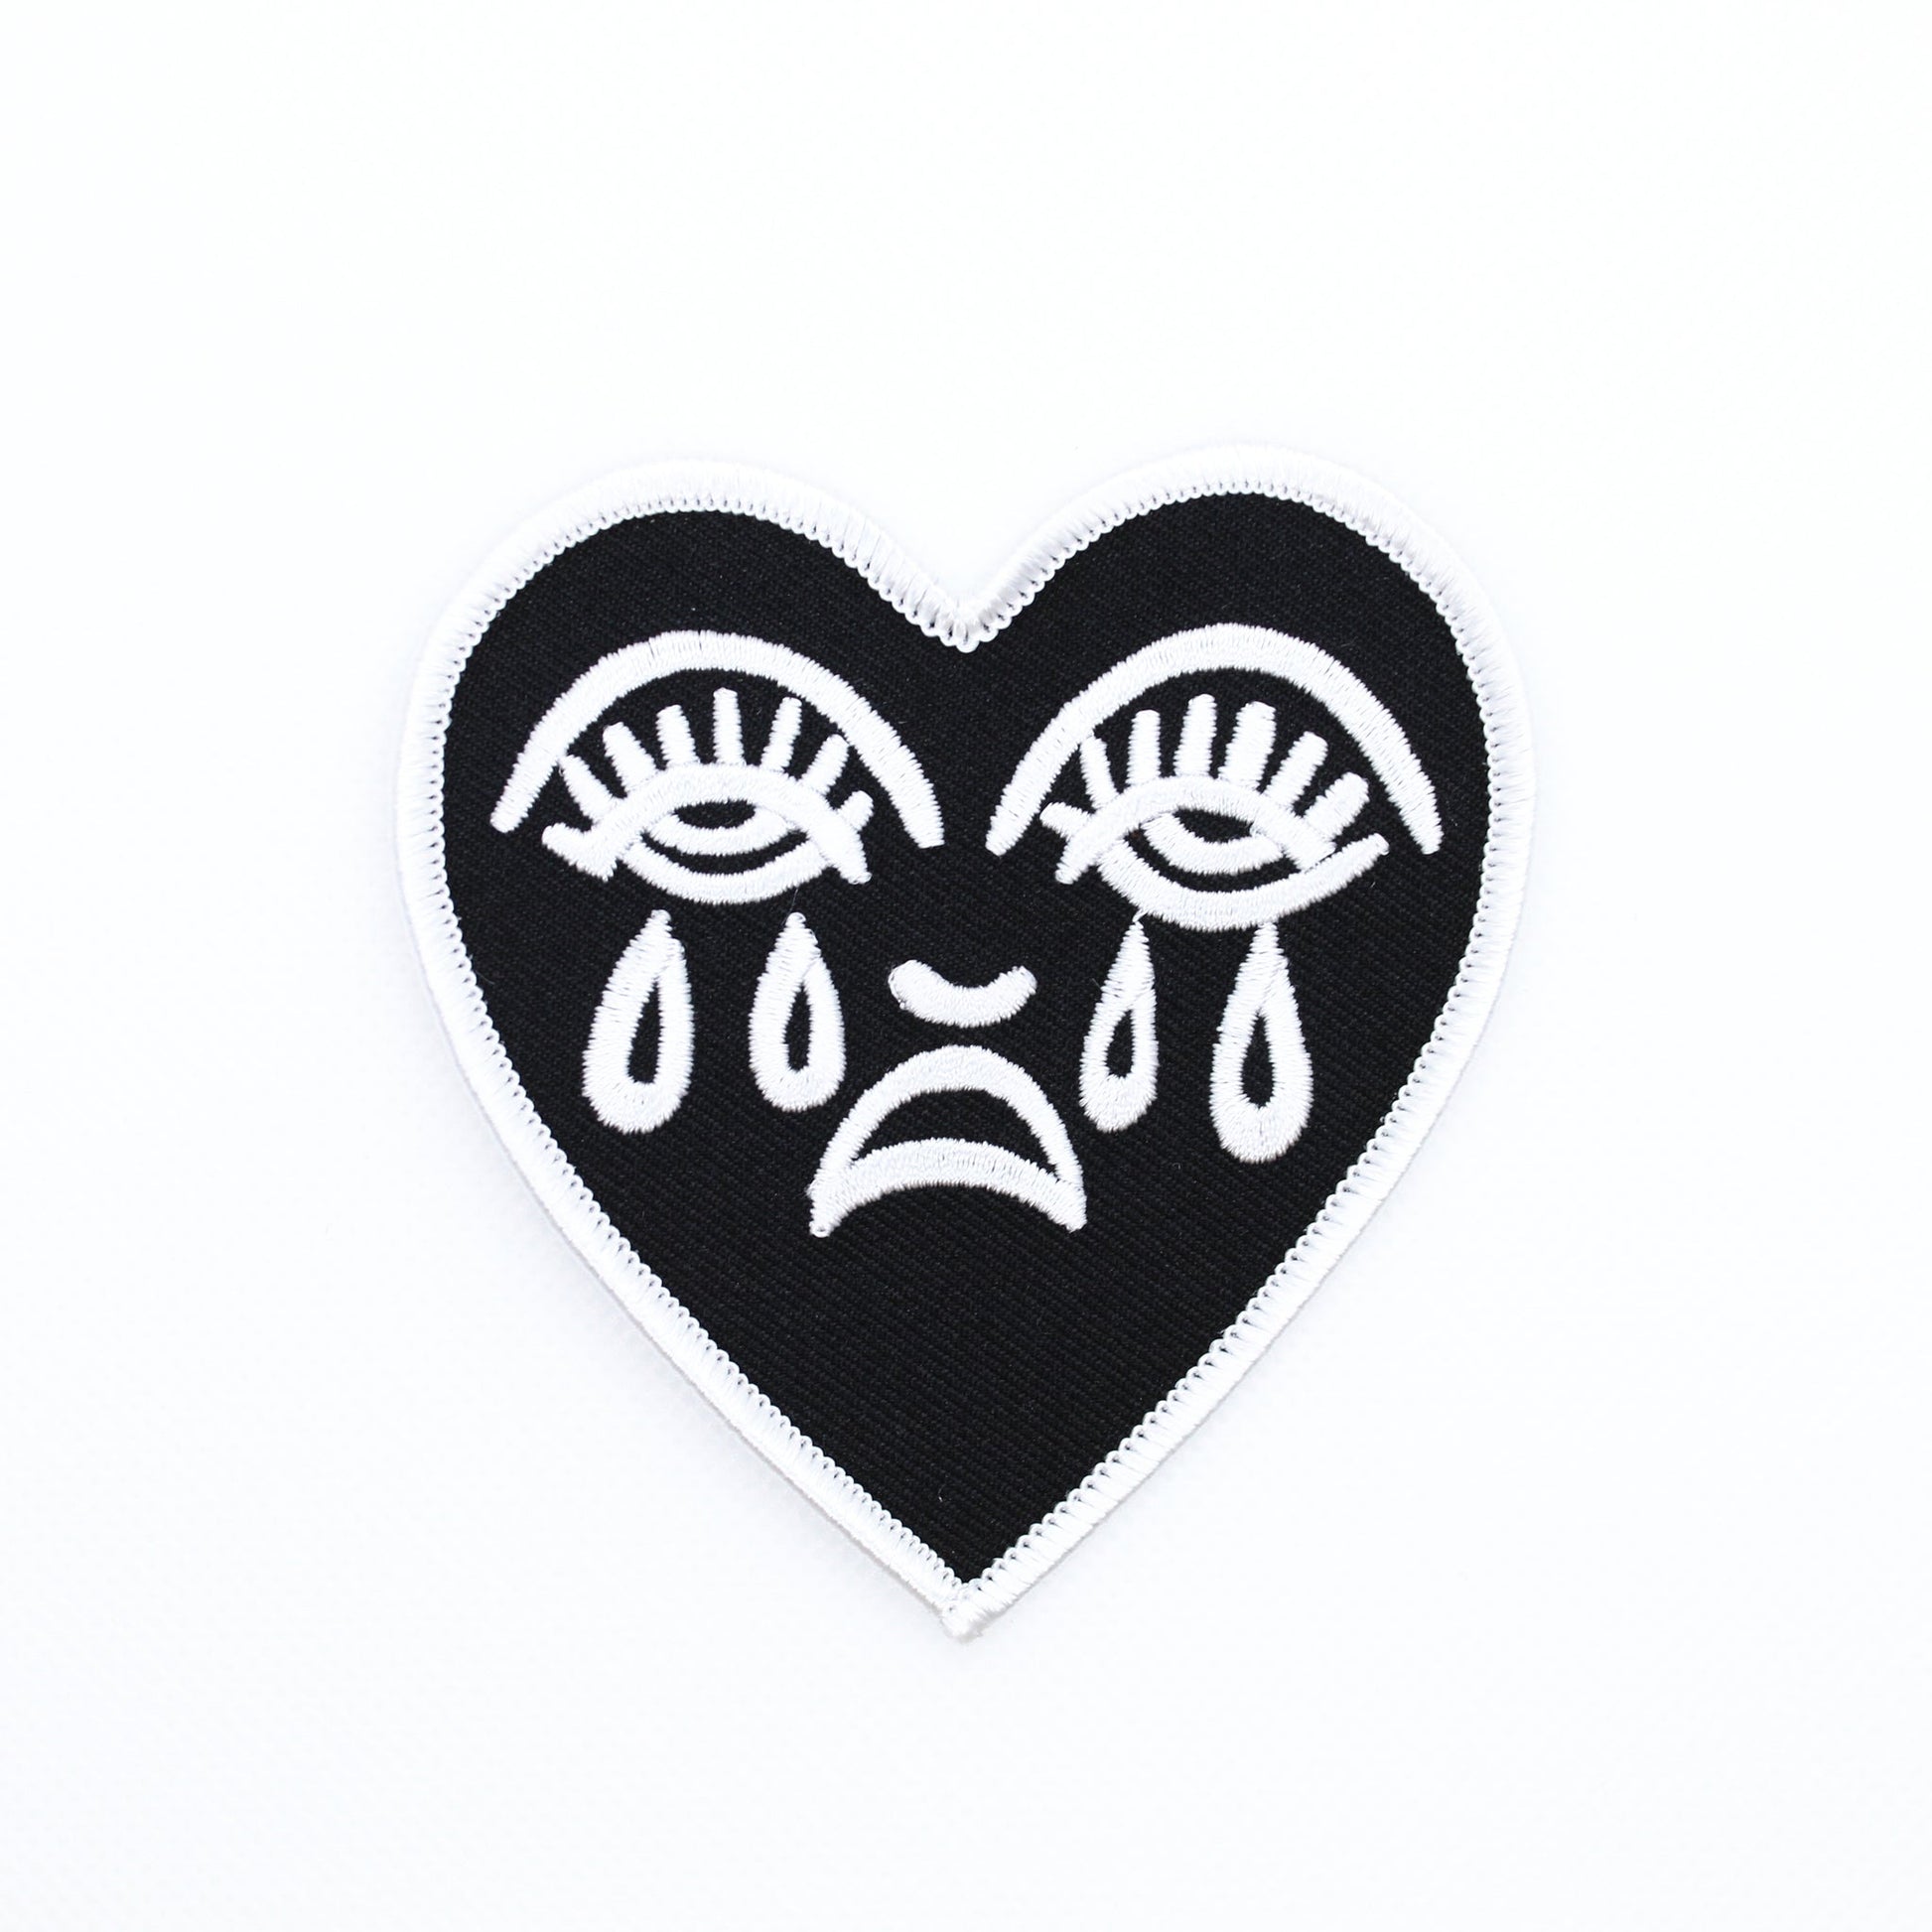 Crying Heart Embroidered Patch - Black